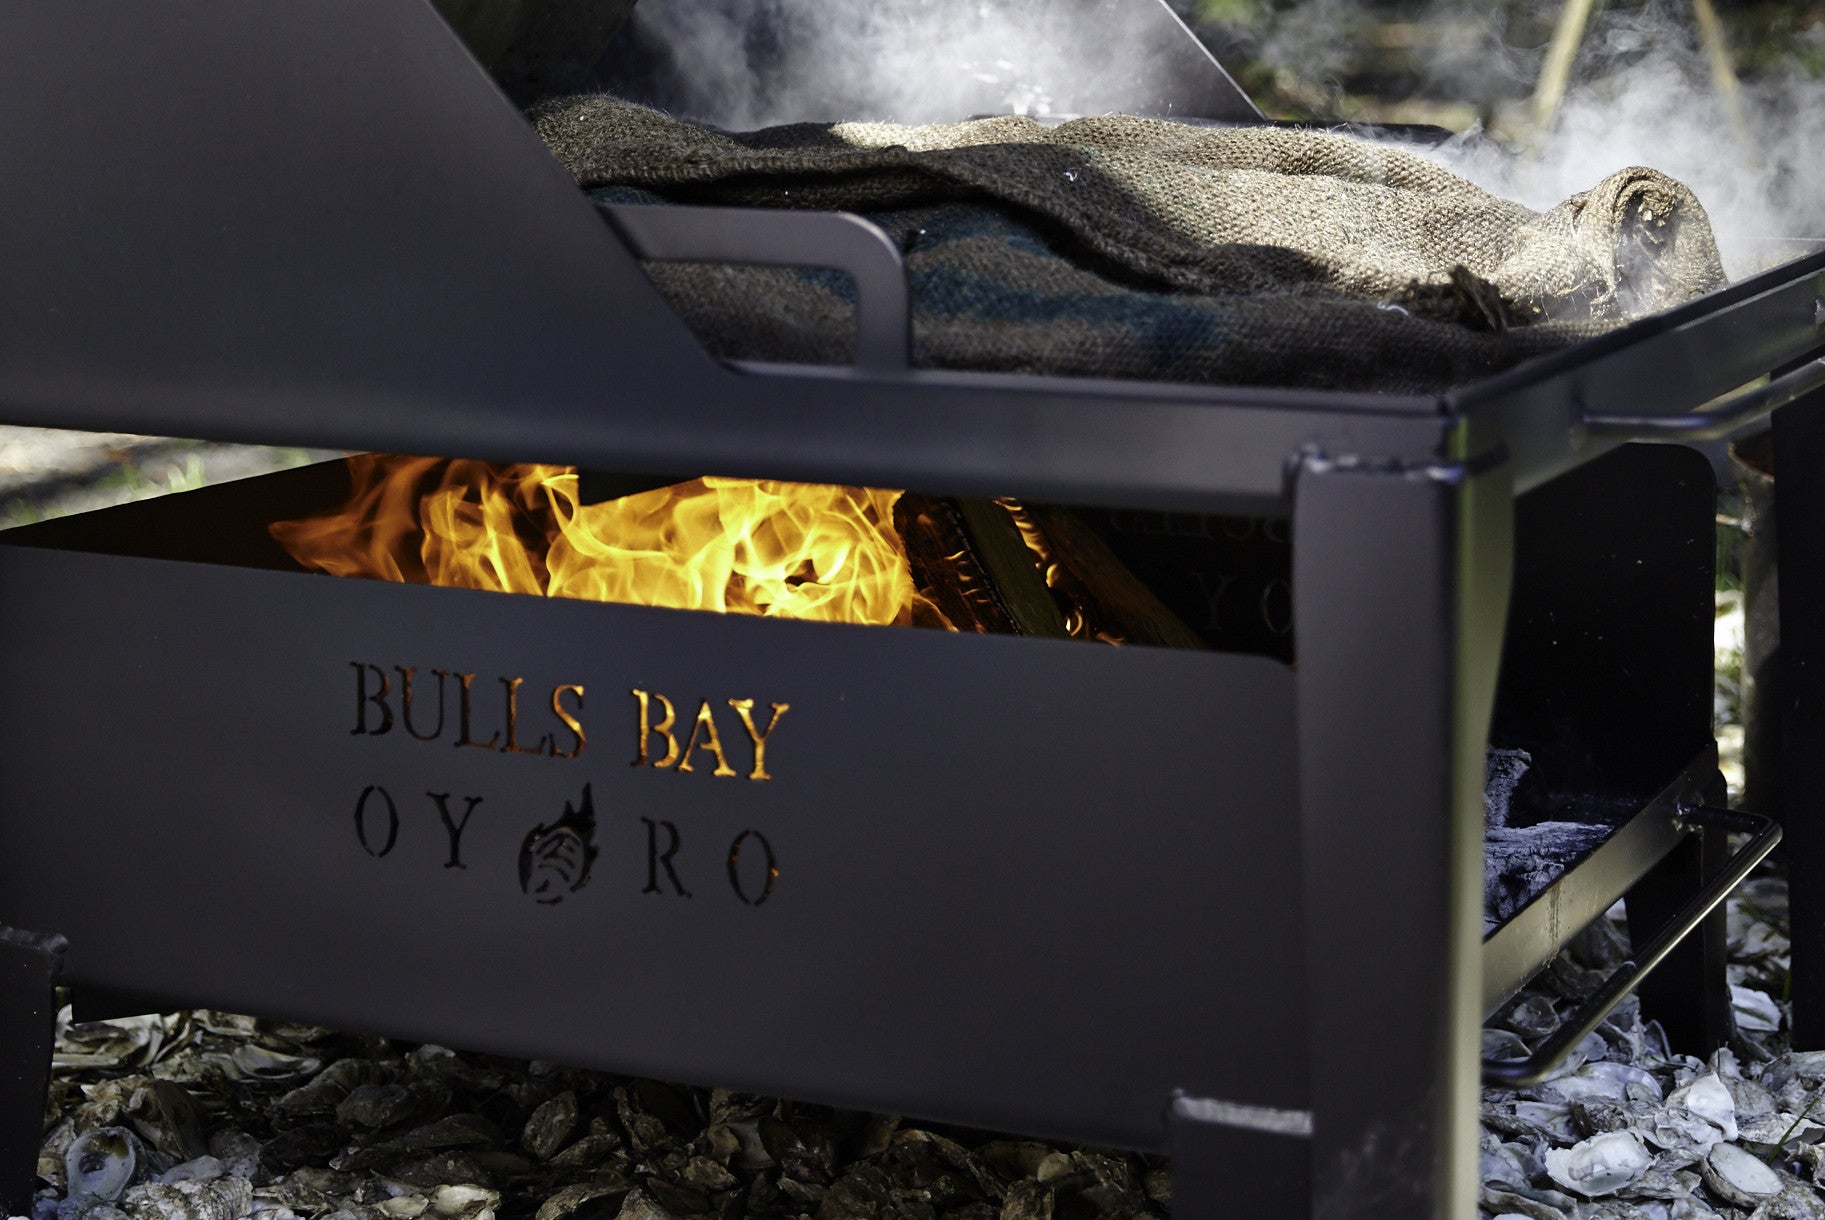 The OYRO Cooker